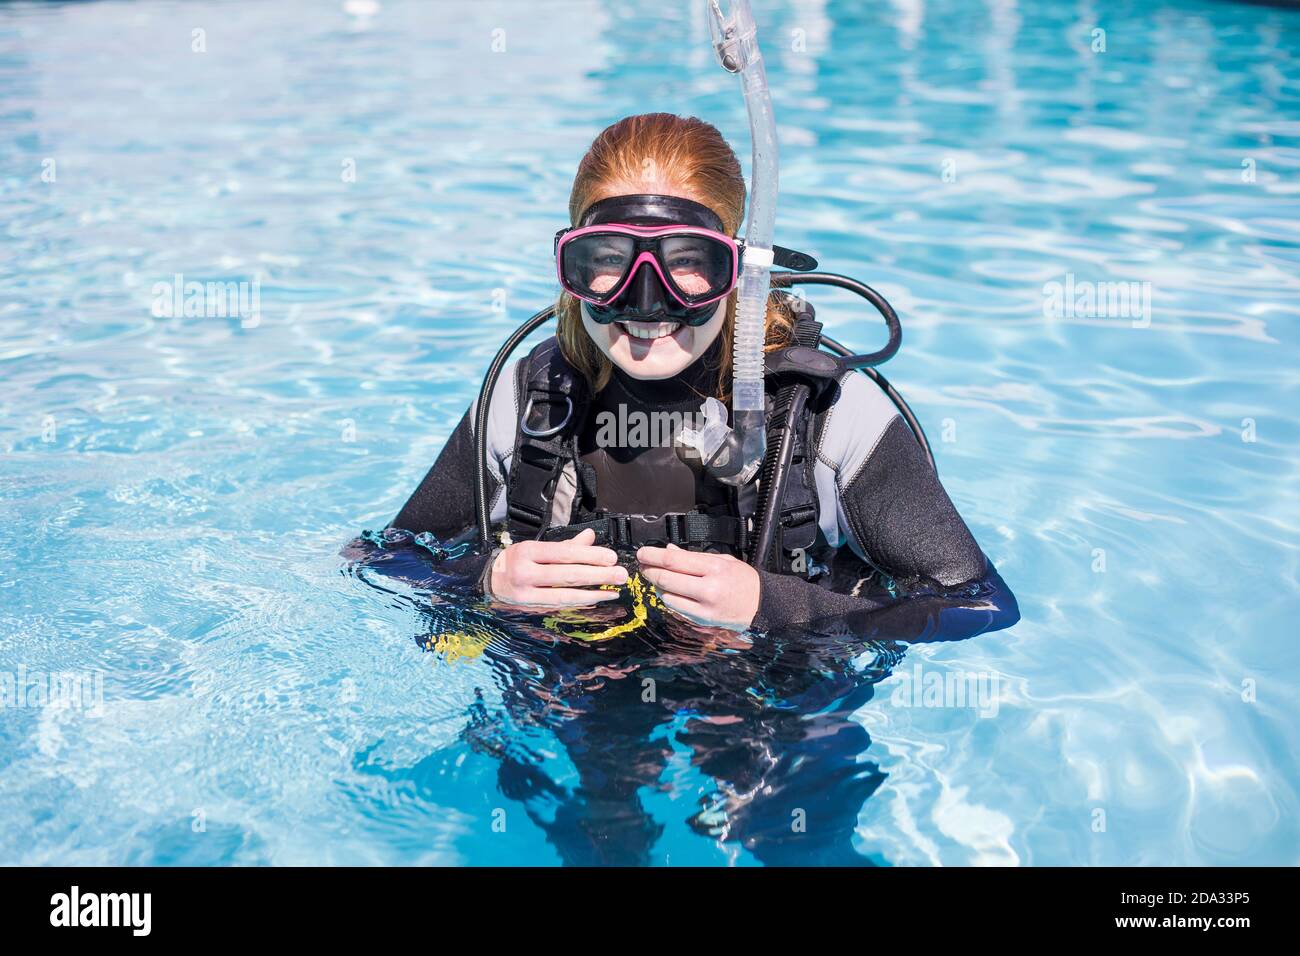 Scuba dive training in a pool with diver looking at the camera with a dive mask on smiling Stock Photo